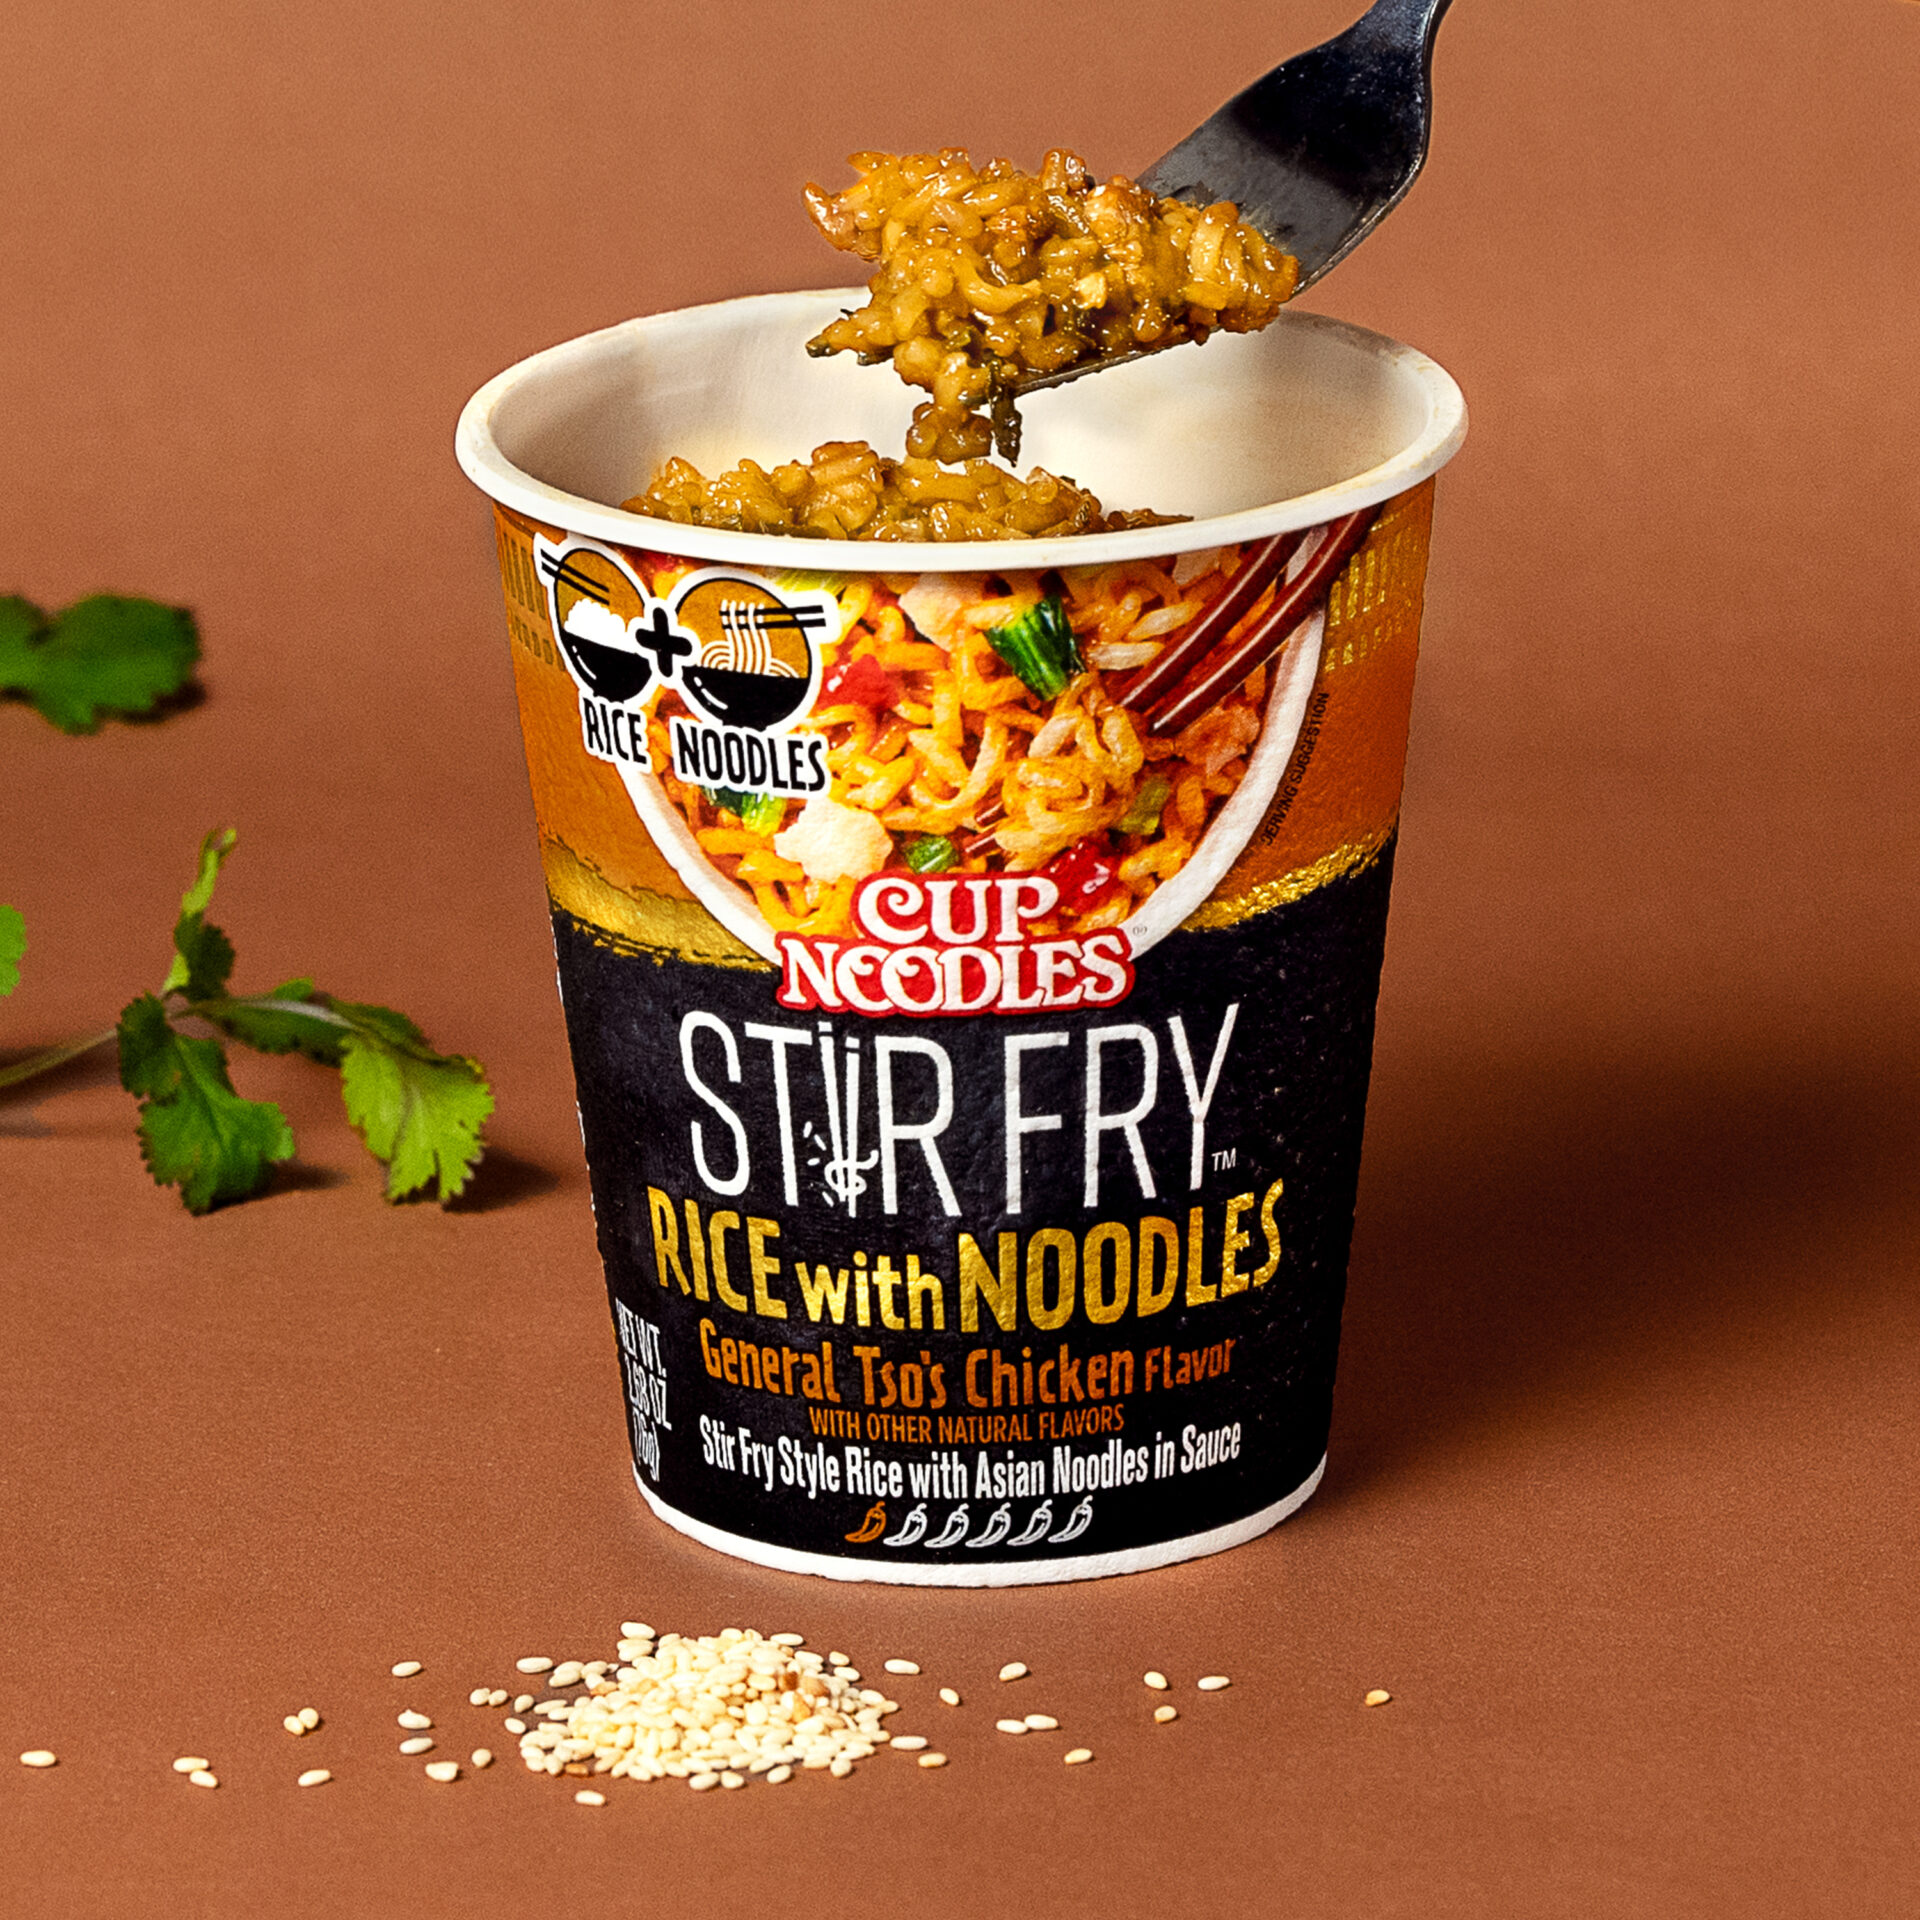 Cup Noodles Stir Fry Rice with Noodles Thai Yellow Curry - Nissin Food